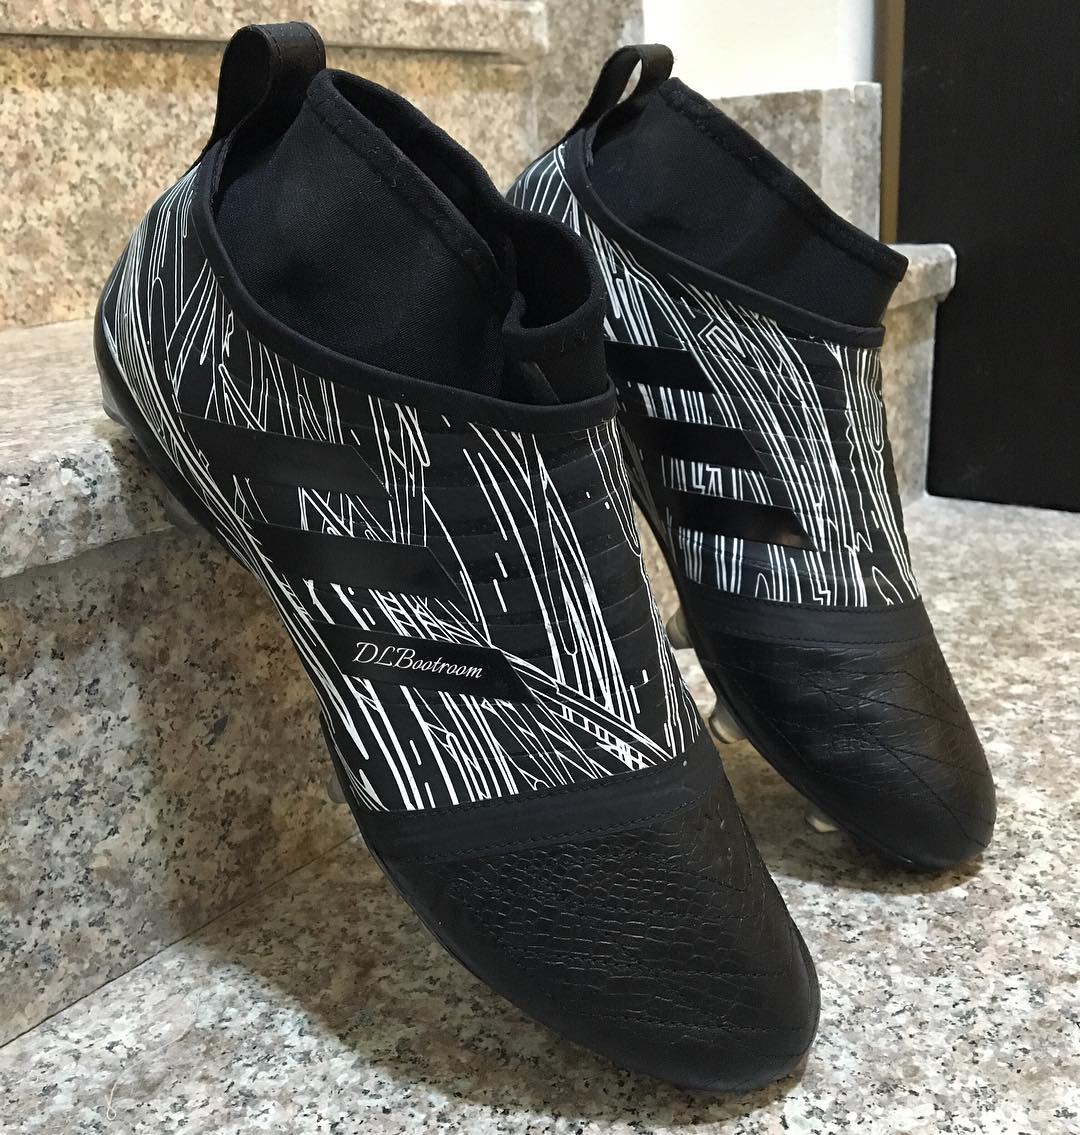 Adidas Camouflage Glitch Boots Come Out 